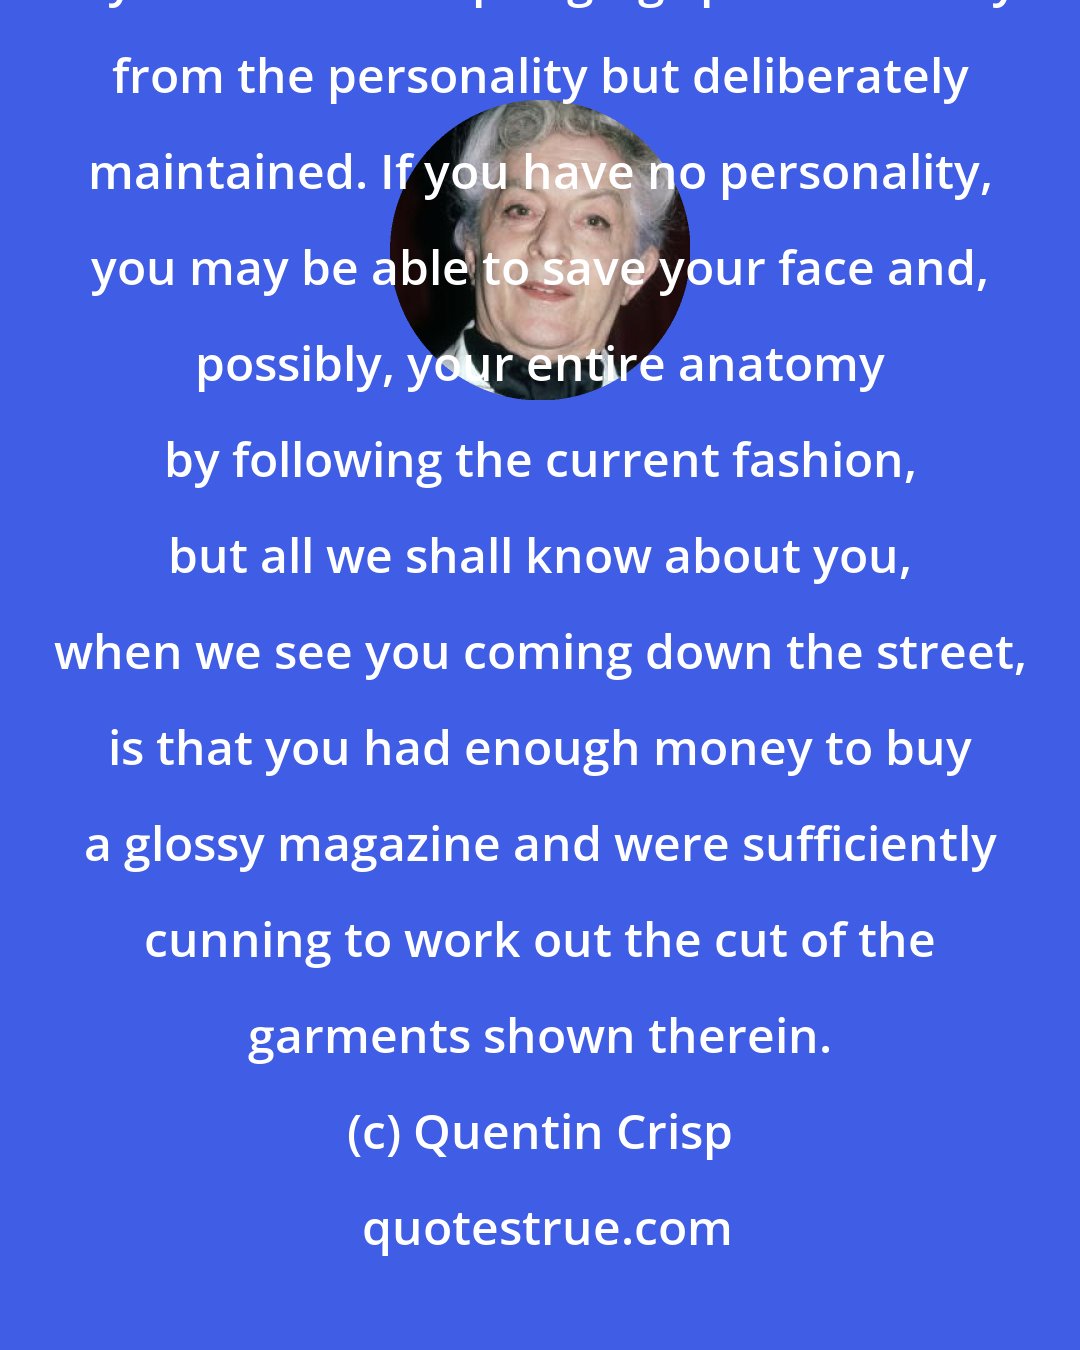 Quentin Crisp: Fashion is not style. Nay, we can say more: Fashion is instead of style. Style is an idiom springing spontaneously from the personality but deliberately maintained. If you have no personality, you may be able to save your face and, possibly, your entire anatomy by following the current fashion, but all we shall know about you, when we see you coming down the street, is that you had enough money to buy a glossy magazine and were sufficiently cunning to work out the cut of the garments shown therein.